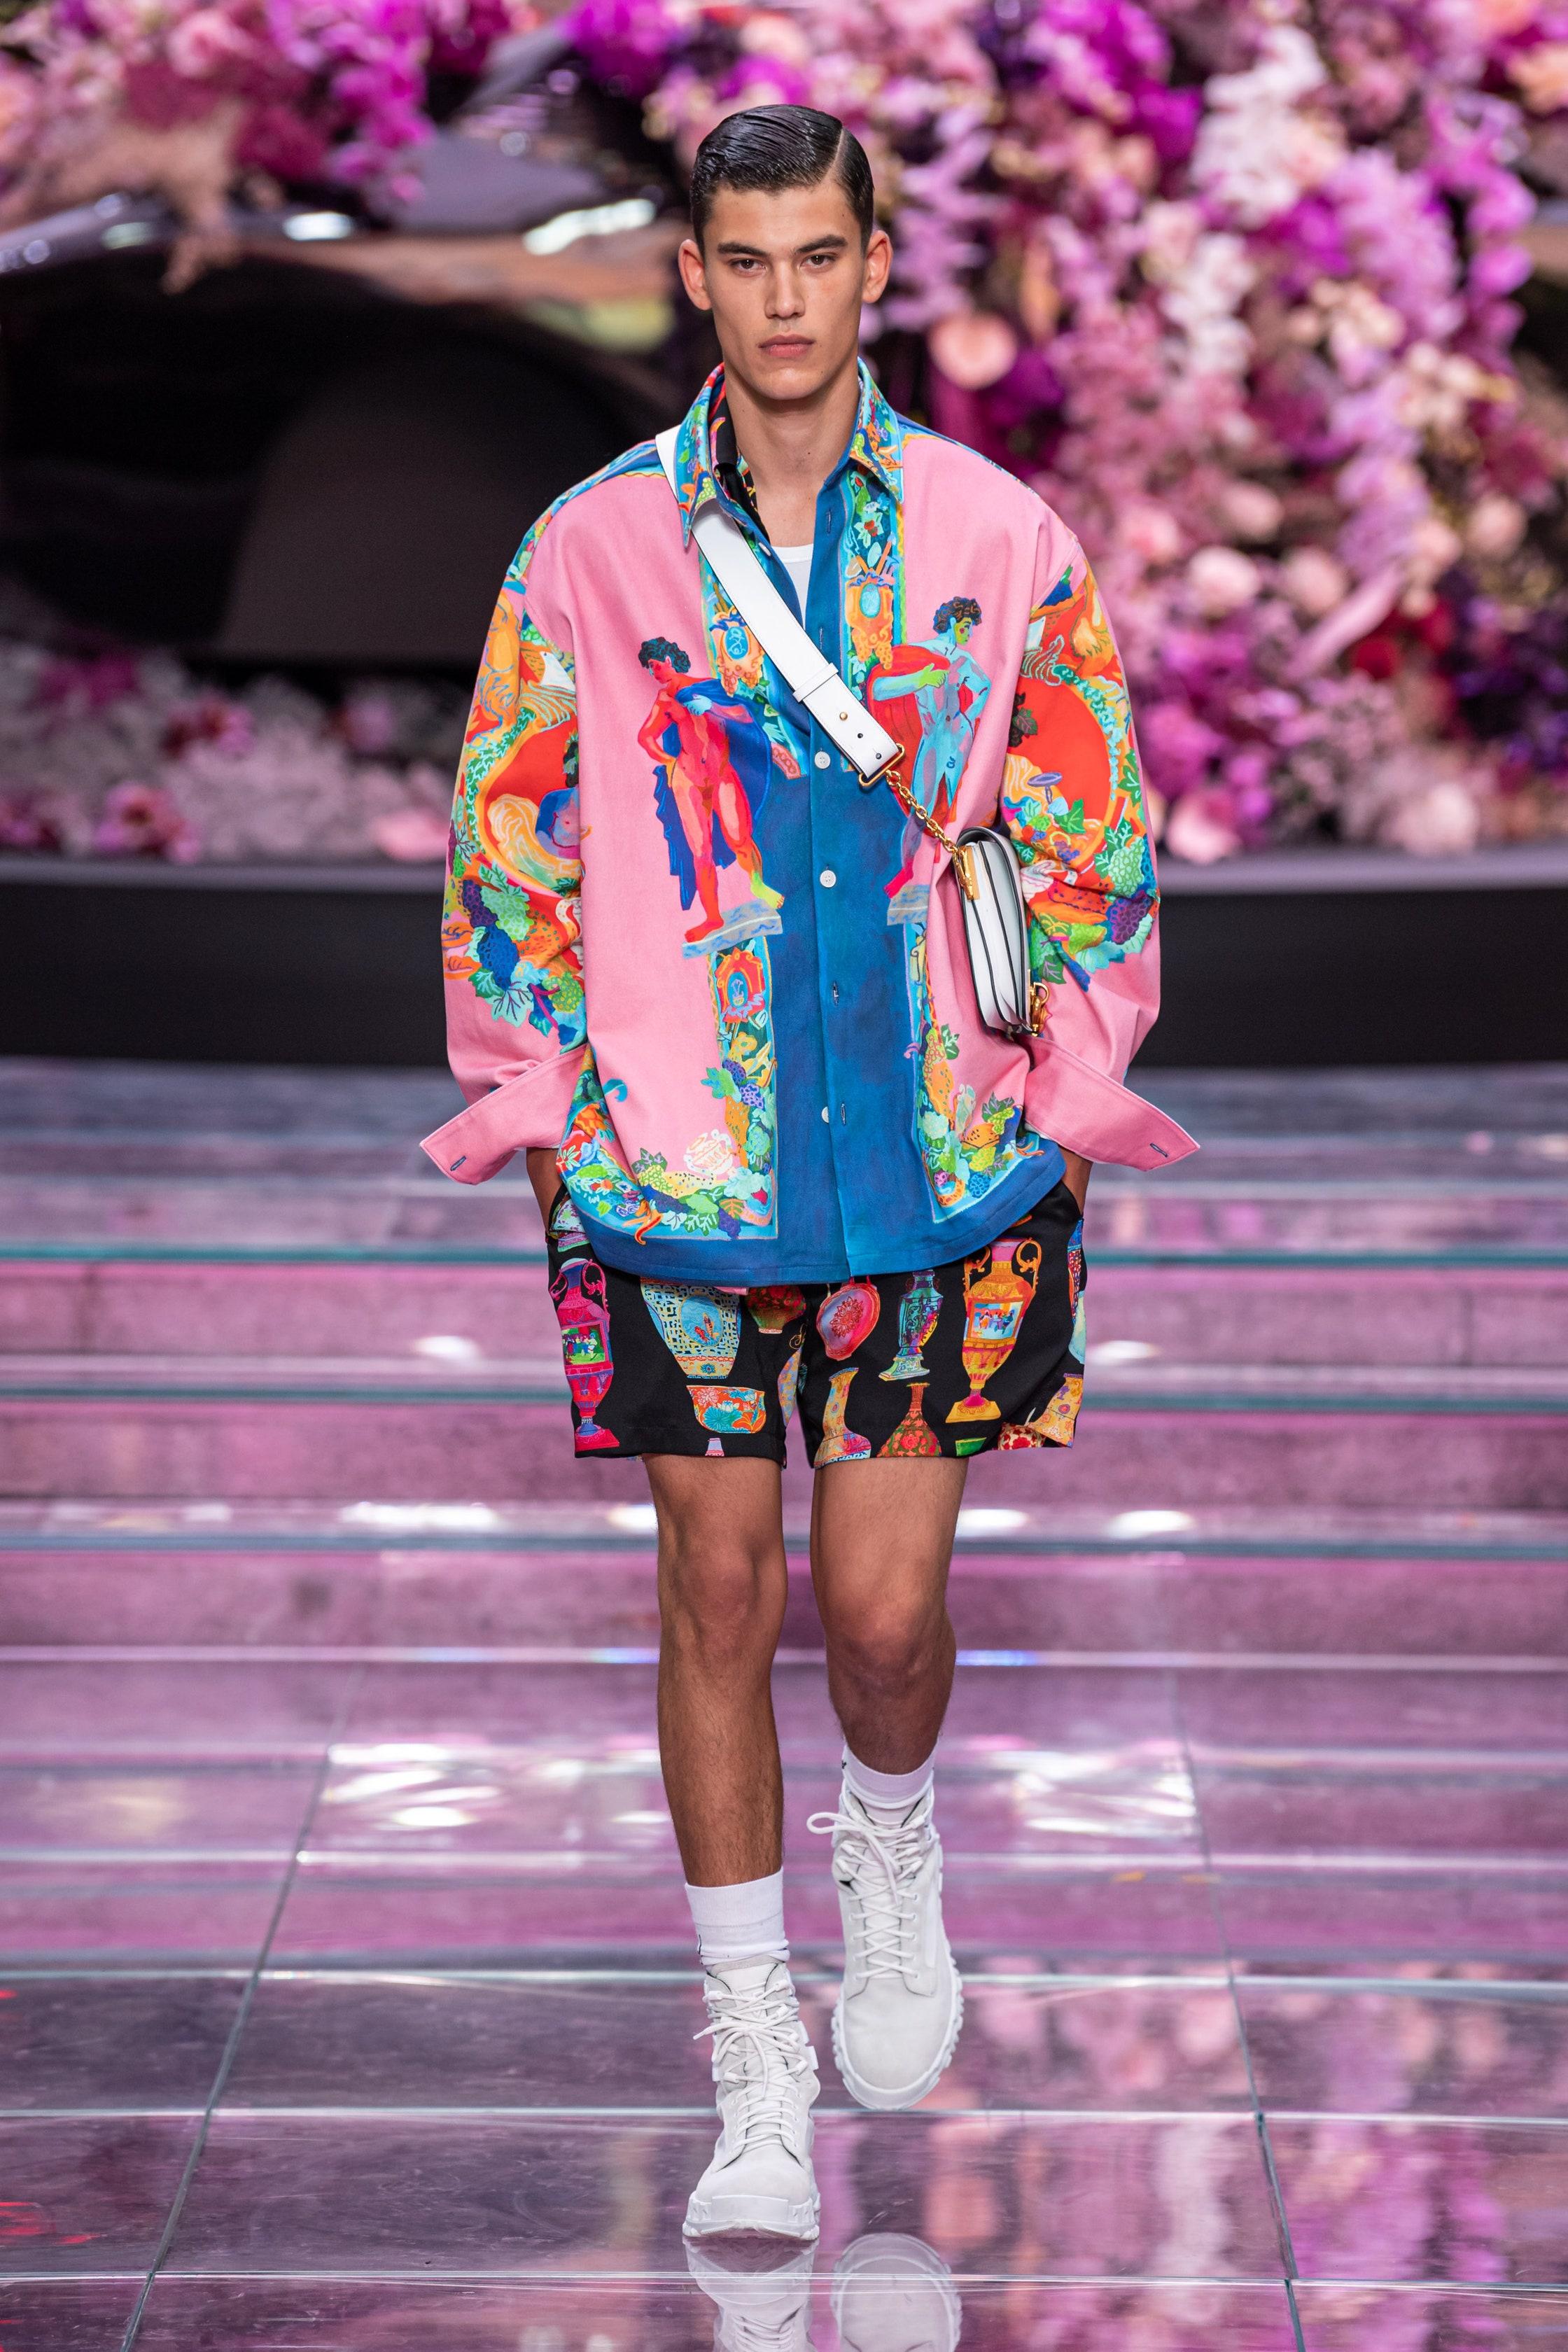 new VERSACE 2020 Runway Andy Dixon Caravaggio Archive pink silk shirt EU38 S
Reference: TGAS/C00005
Brand: Versace
Designer: Donatella Versace
Collection: Spring Summer 2020 Runway
Material: Silk
Color: Pink
Pattern: Caraggio
Closure: Button
Extra